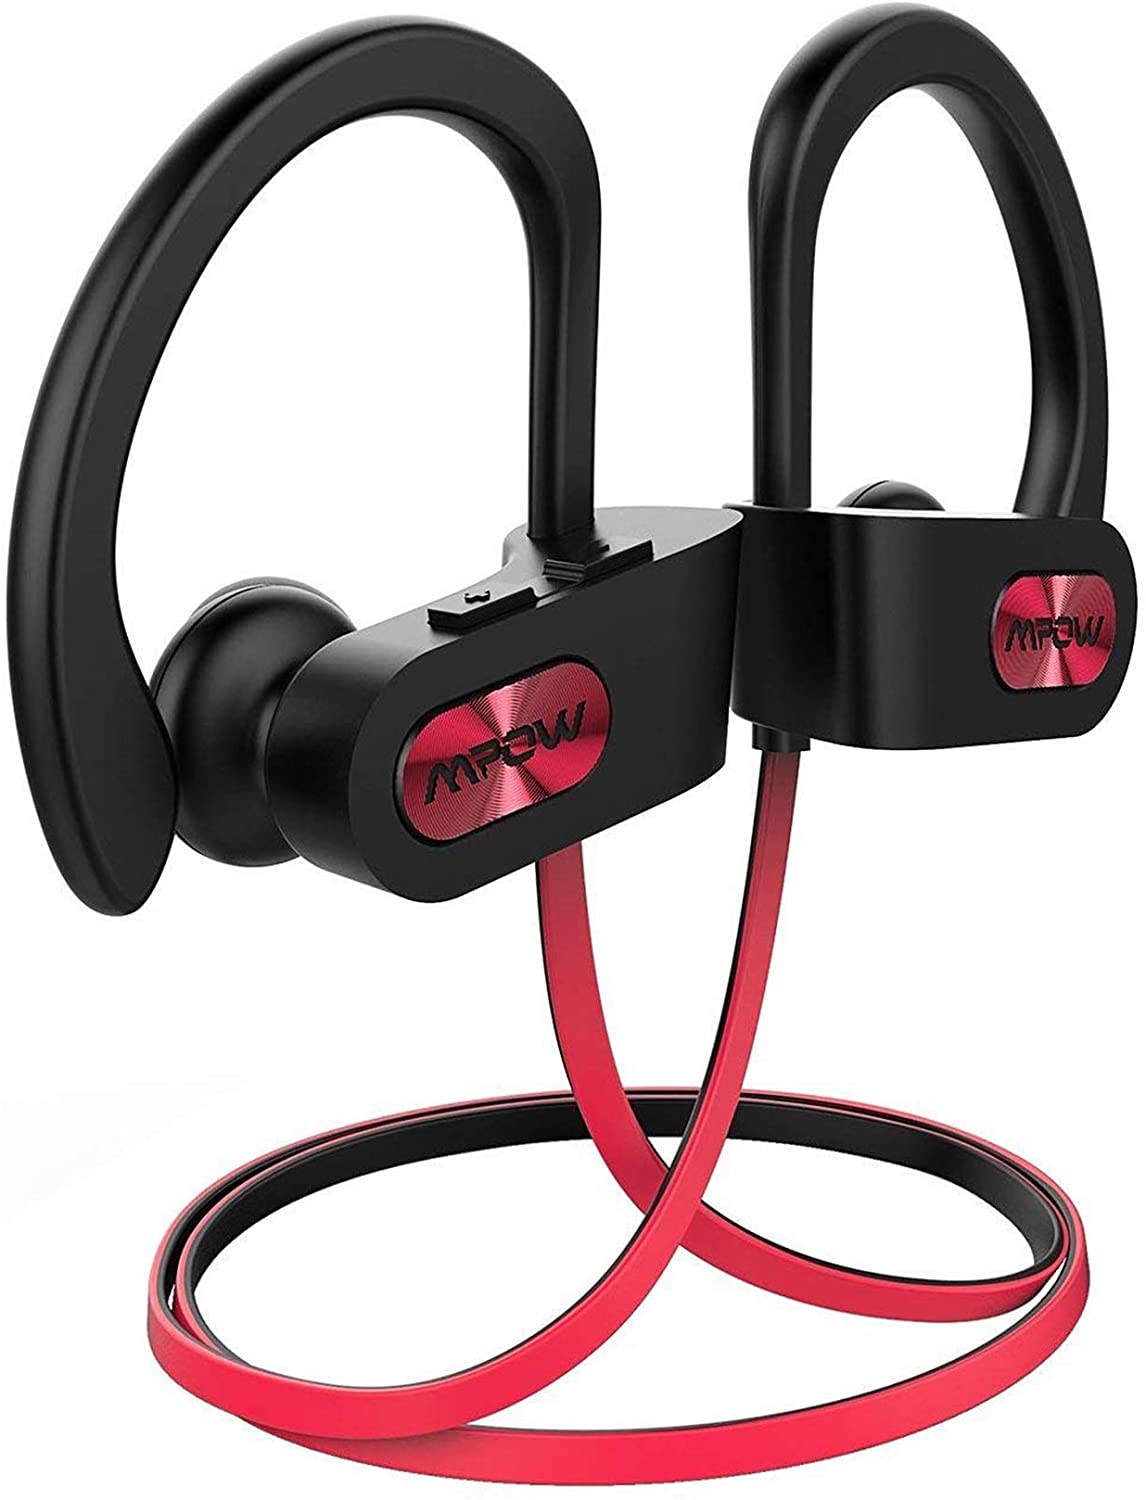 Review of Mpow Flame Bluetooth Headphones V5.0 IPX7